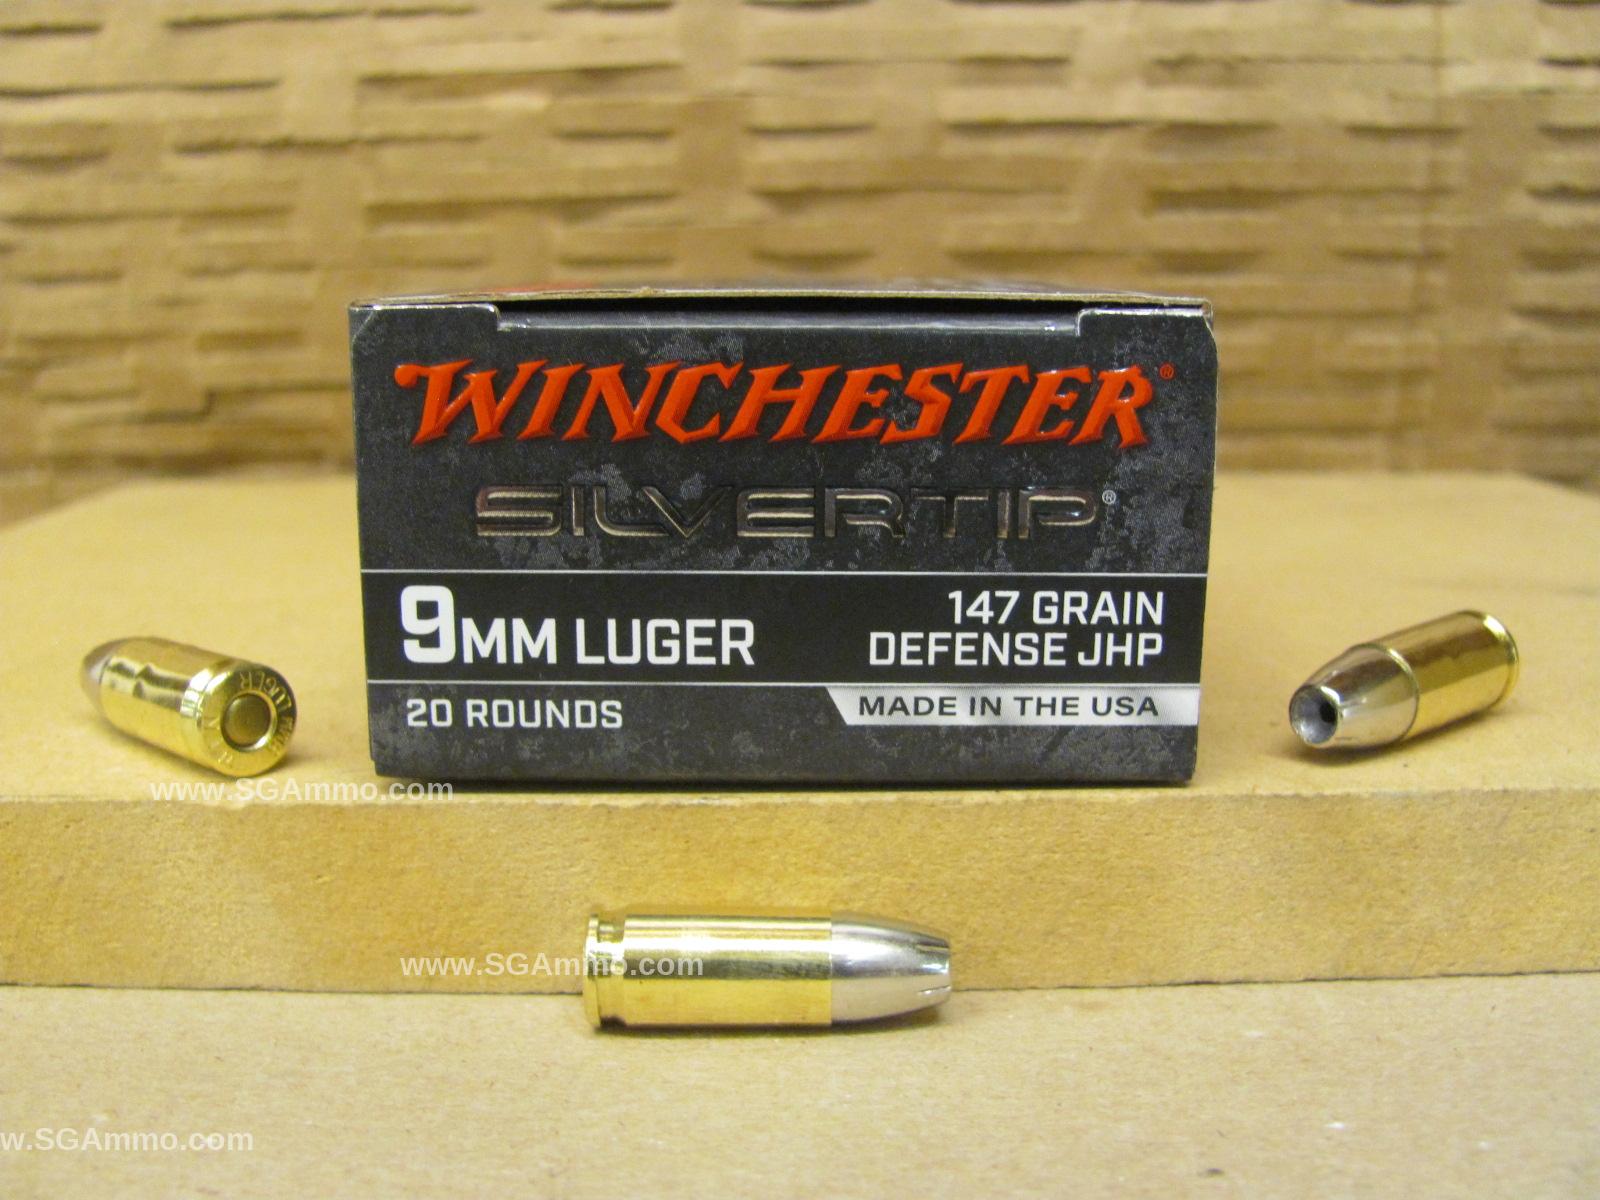 200 Round Case - 9mm Luger 147 Grain Winchester Silver Tip Hollow Point Ammo - W9MMST2